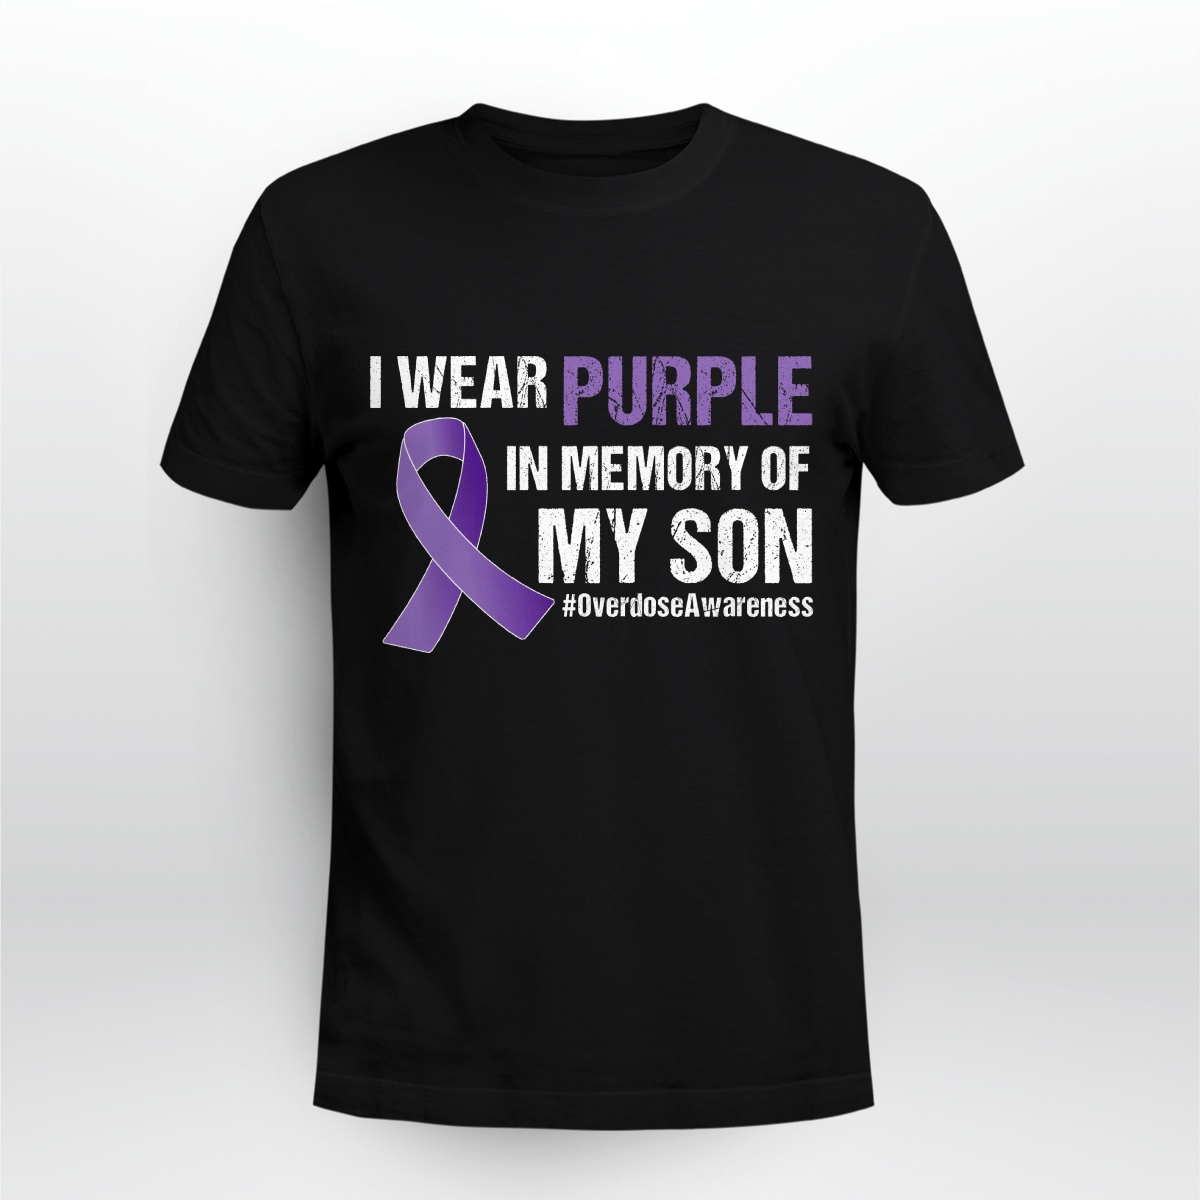 I Wear Purple In Memory Of My Son Overdose Awareness Shirt Style: Unisex T-shirt, Color: Black